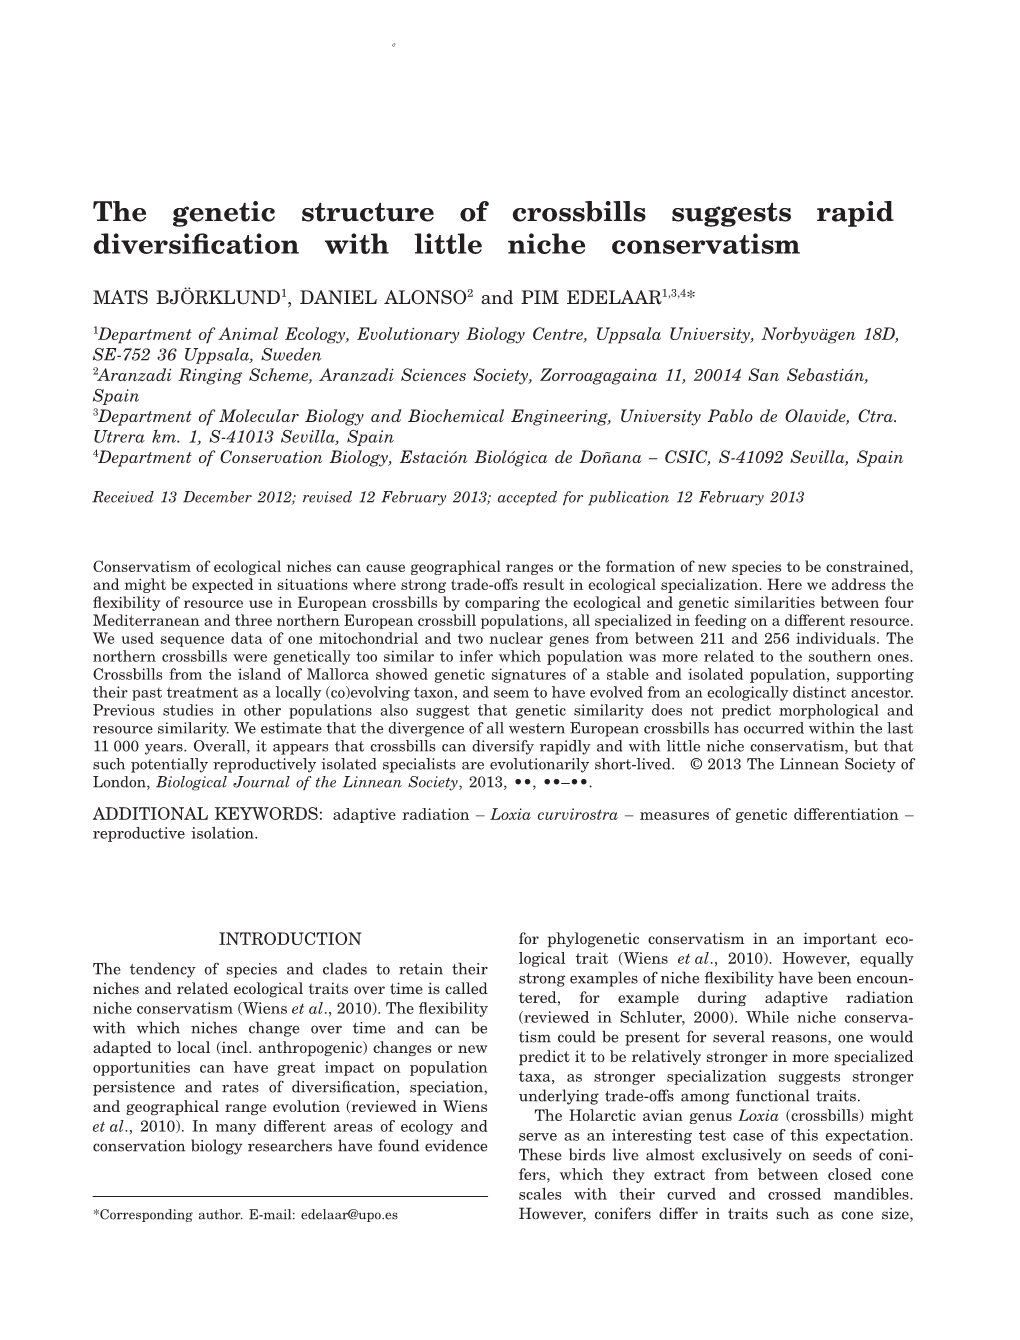 The Genetic Structure of Crossbills Suggests Rapid Diversification With